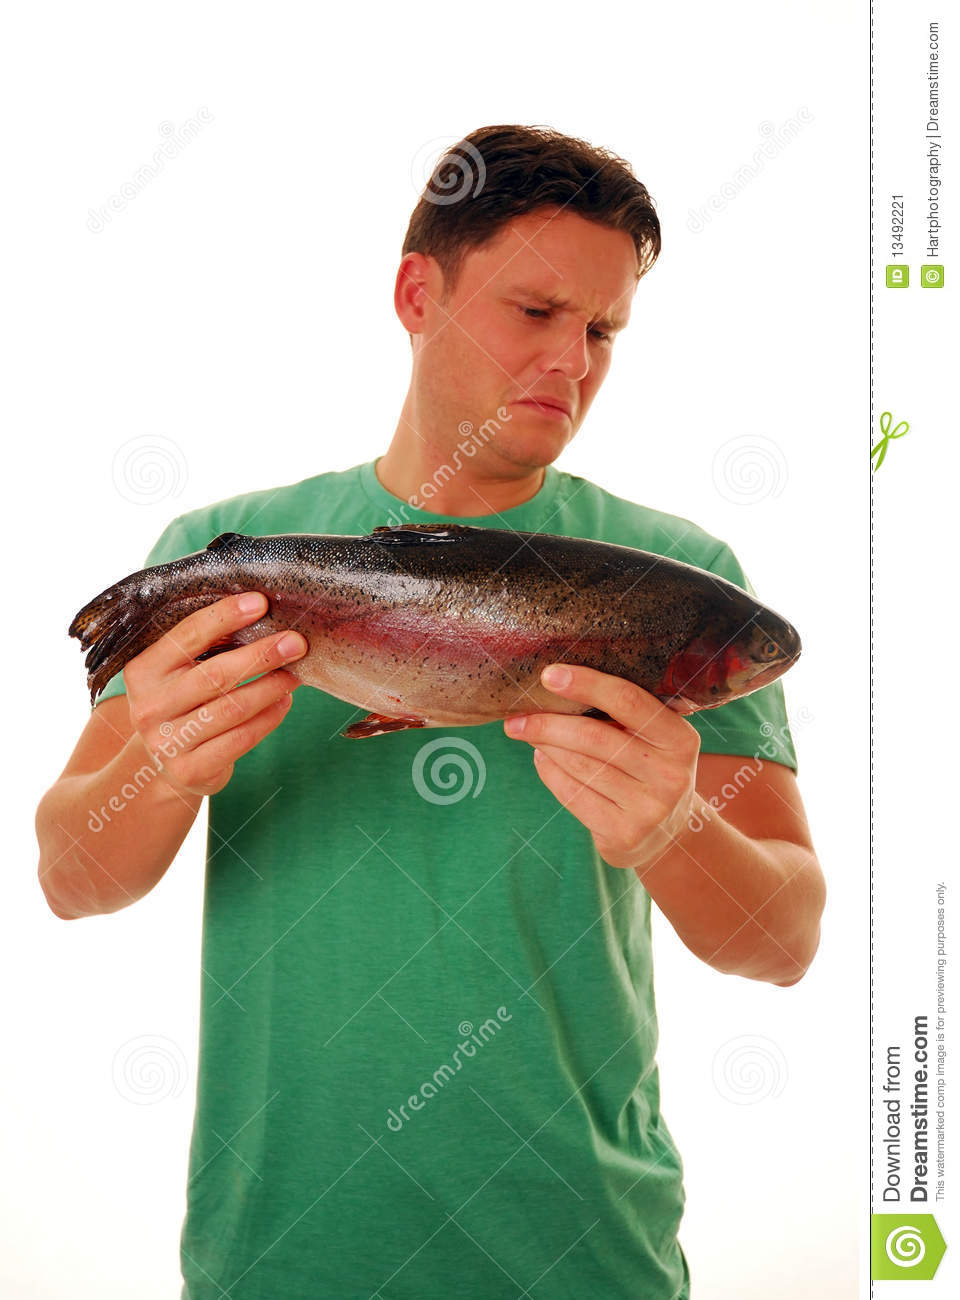 Smelly Fish Stock Image   Image  13492221